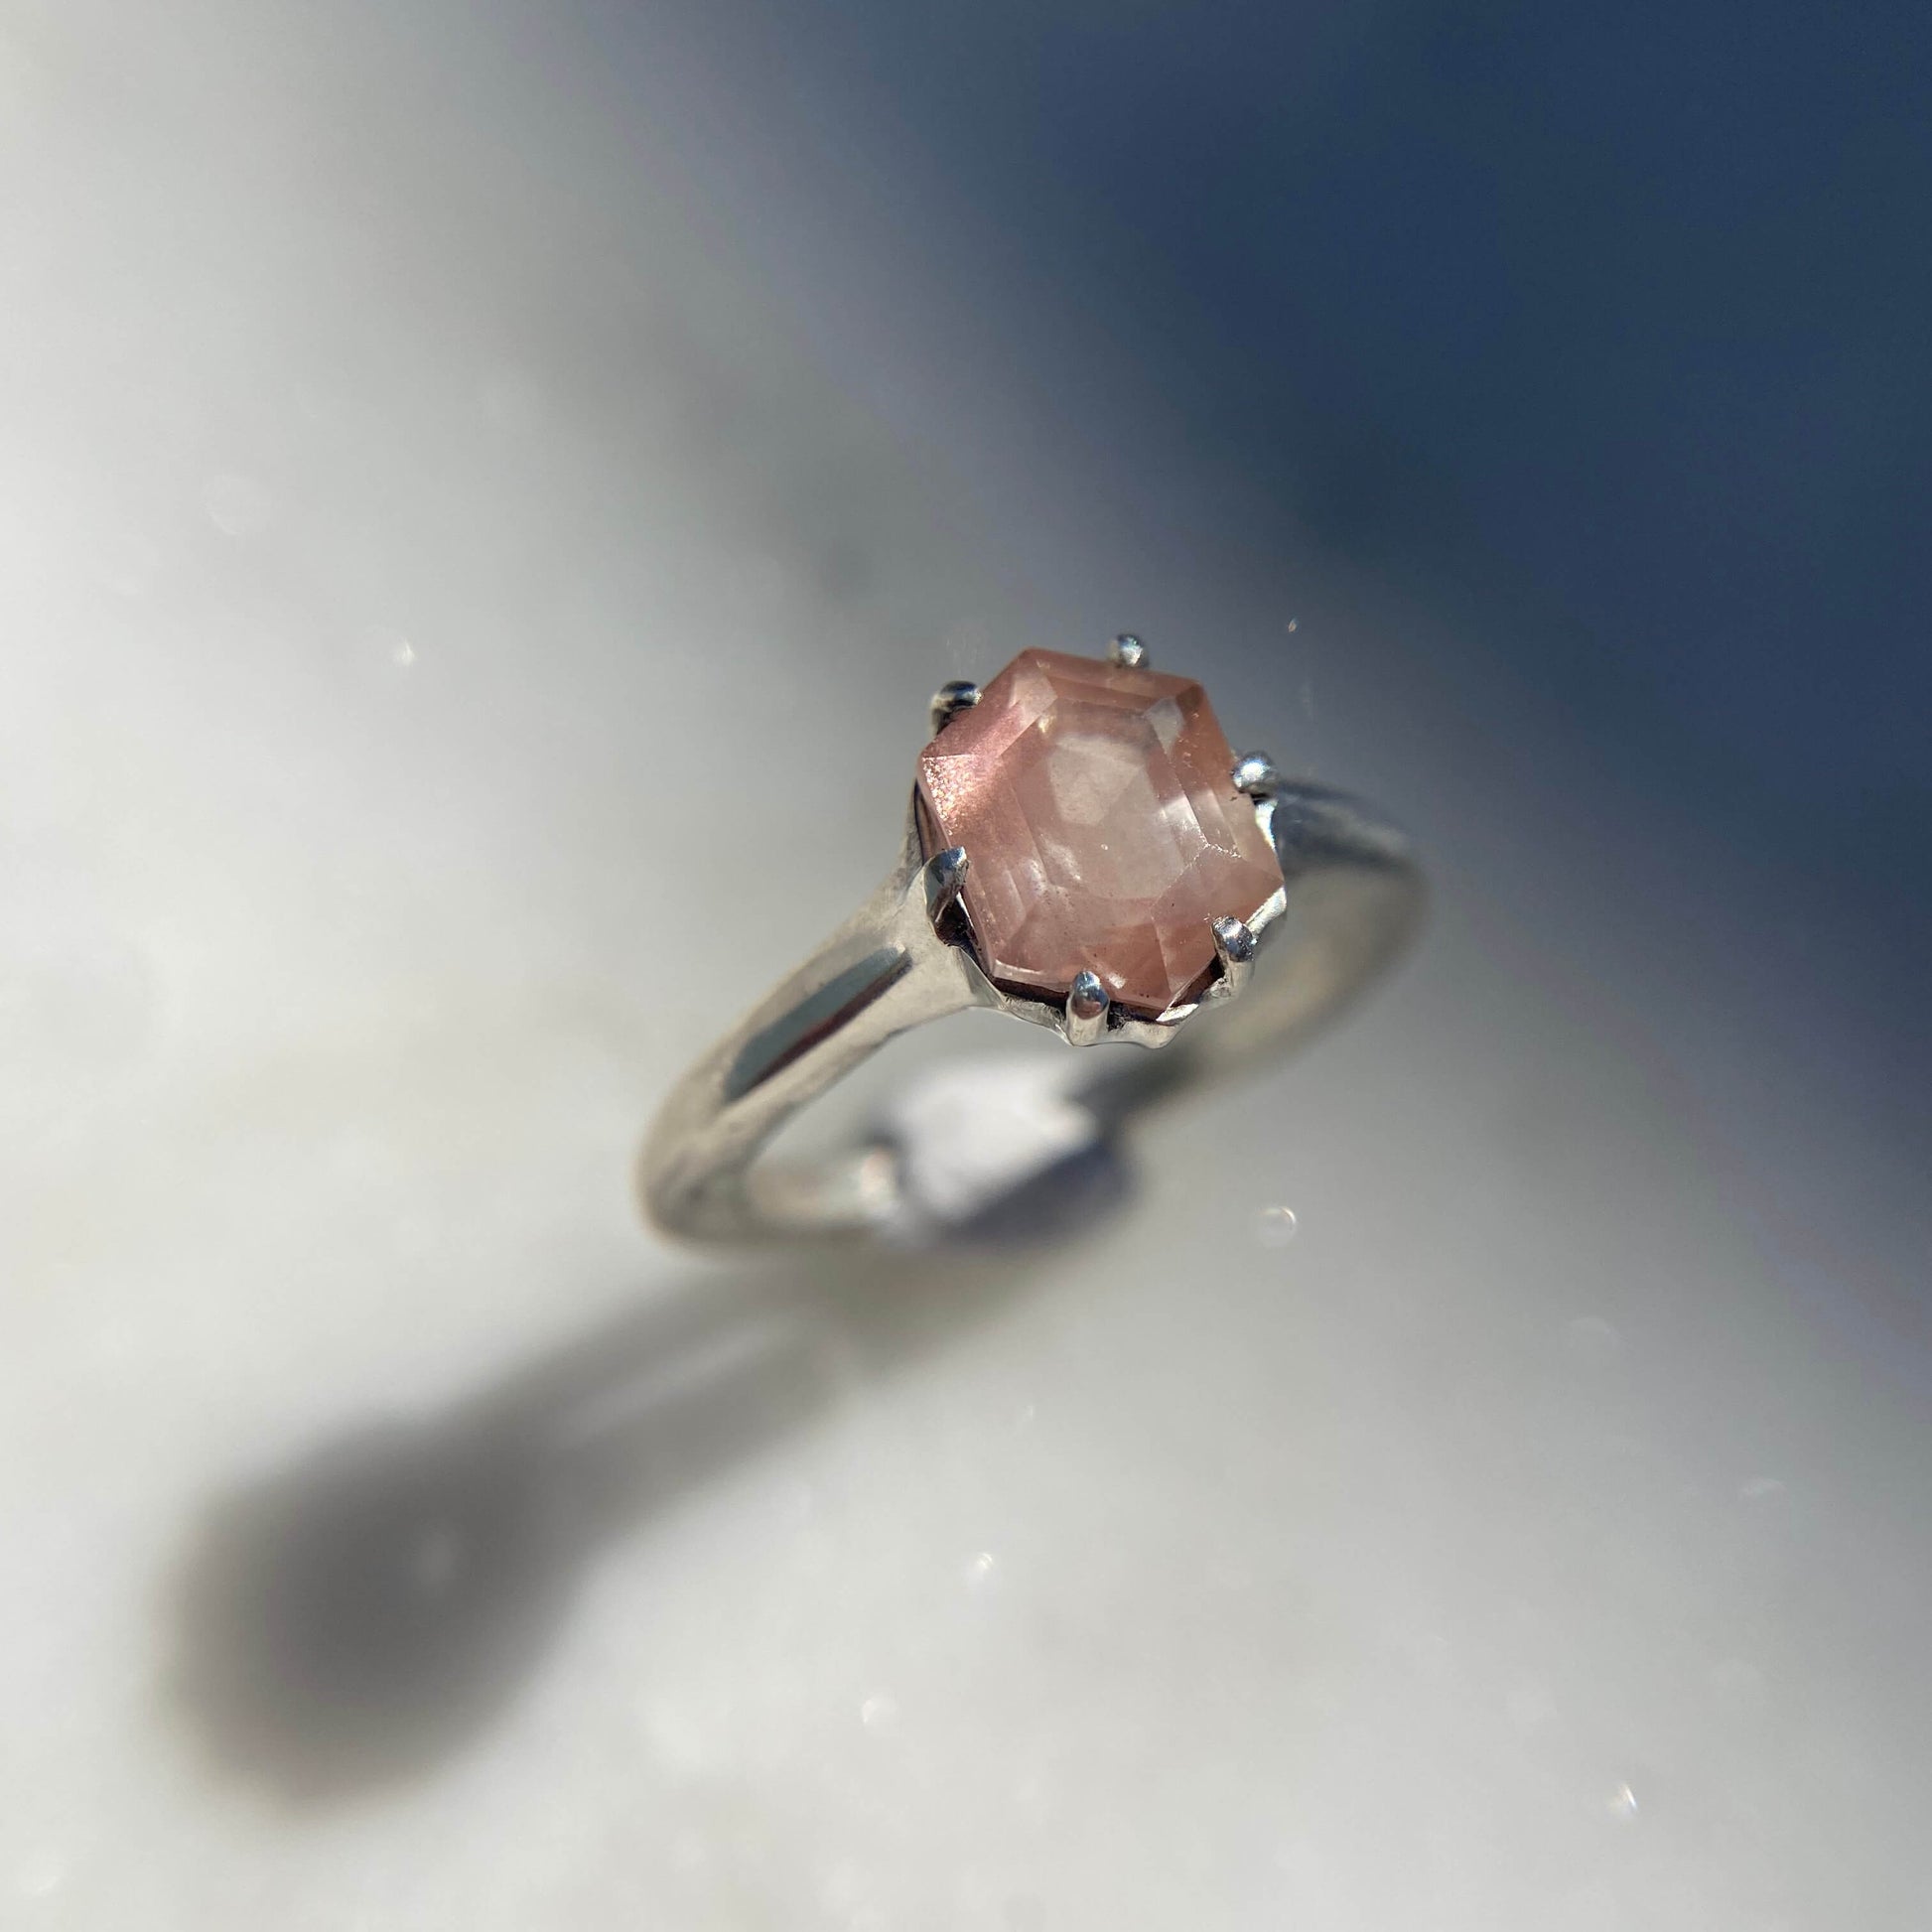 Oregon Sunstone hexagonal ring set in sterling silver, handmade by Iron Oxide Designs